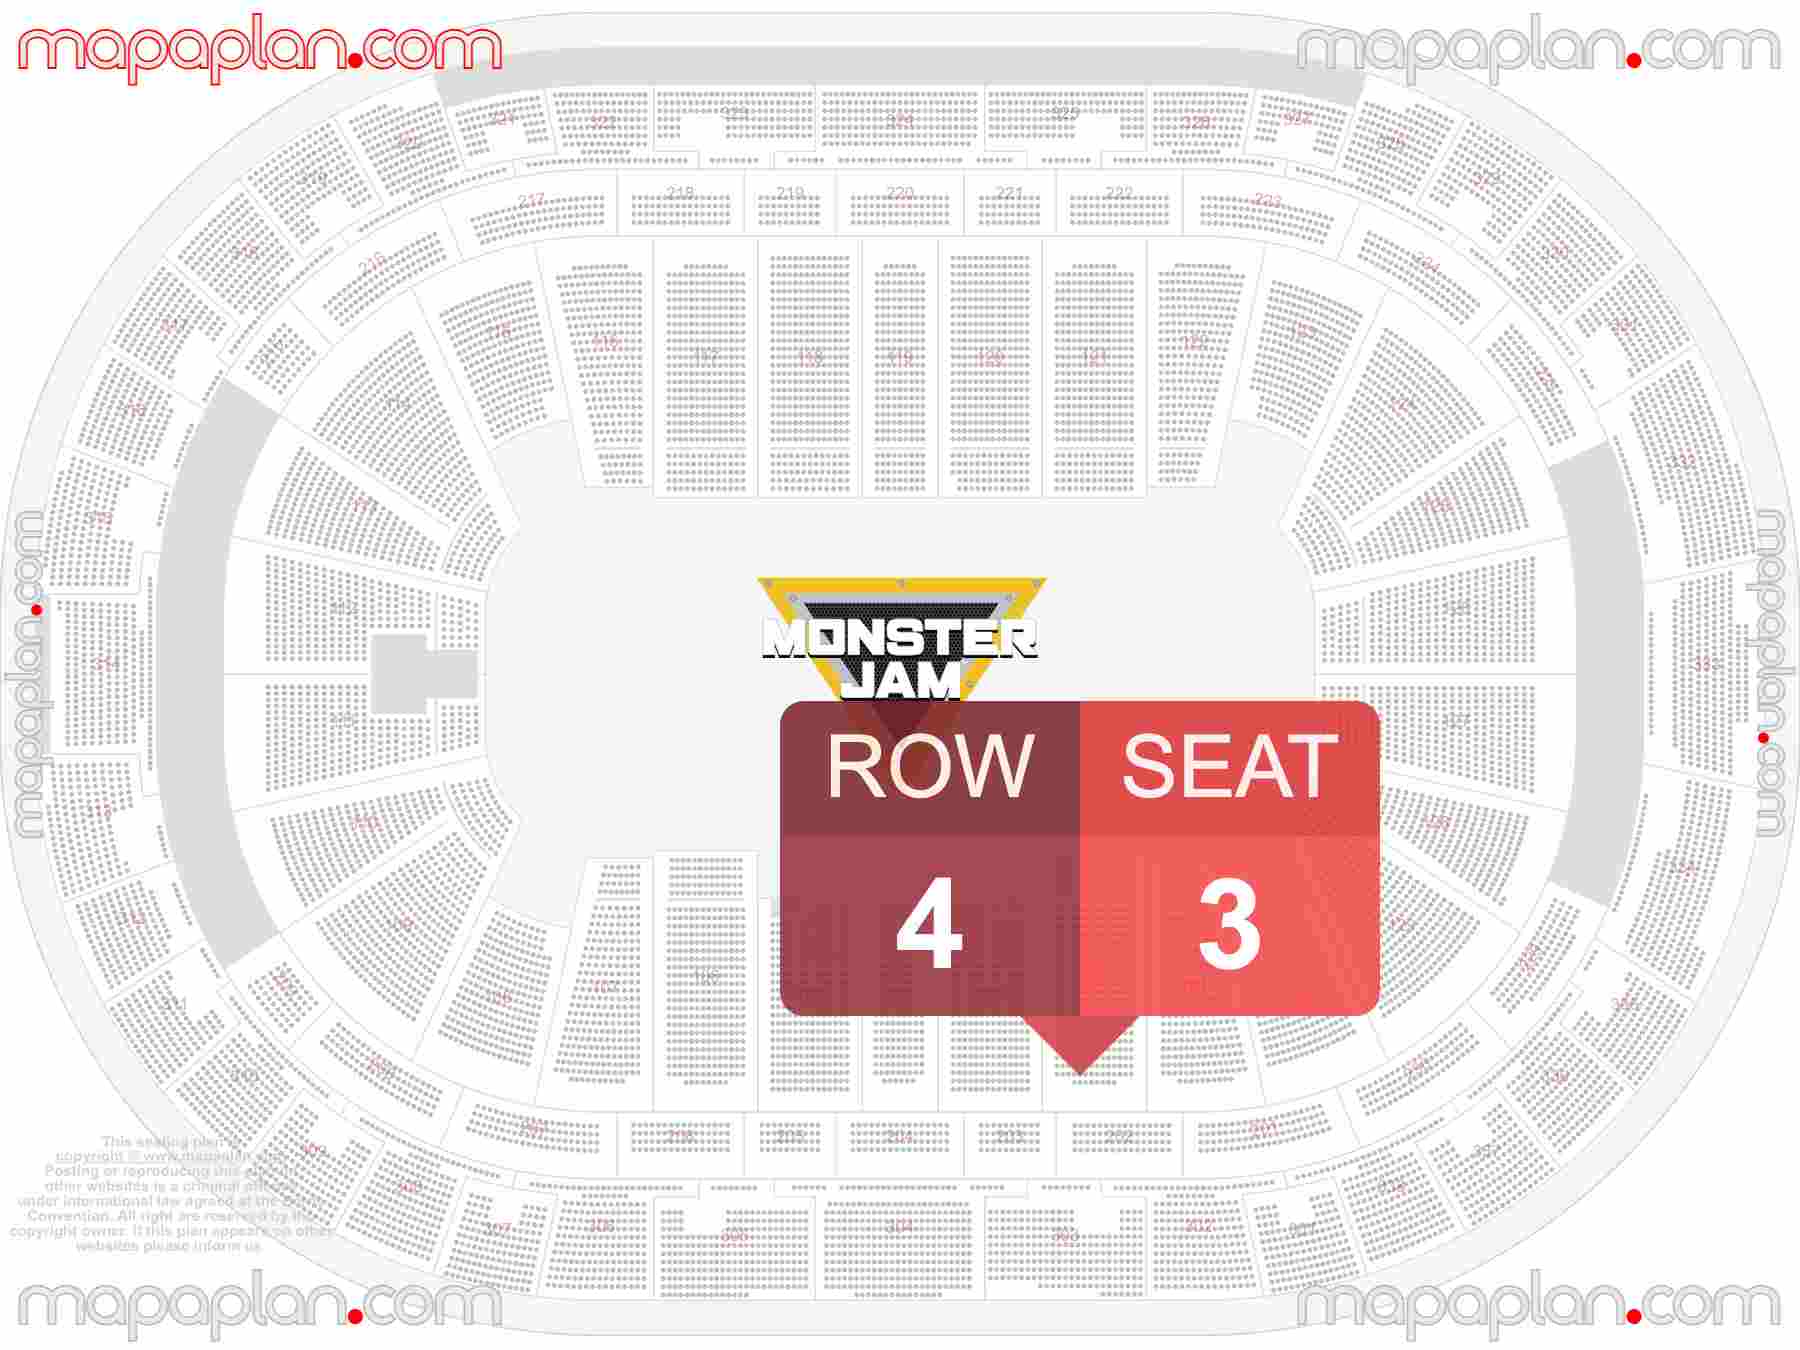 Raleigh PNC Arena seating chart Monster Jam trucks seating plan - Interactive map to find best seat and row numbers